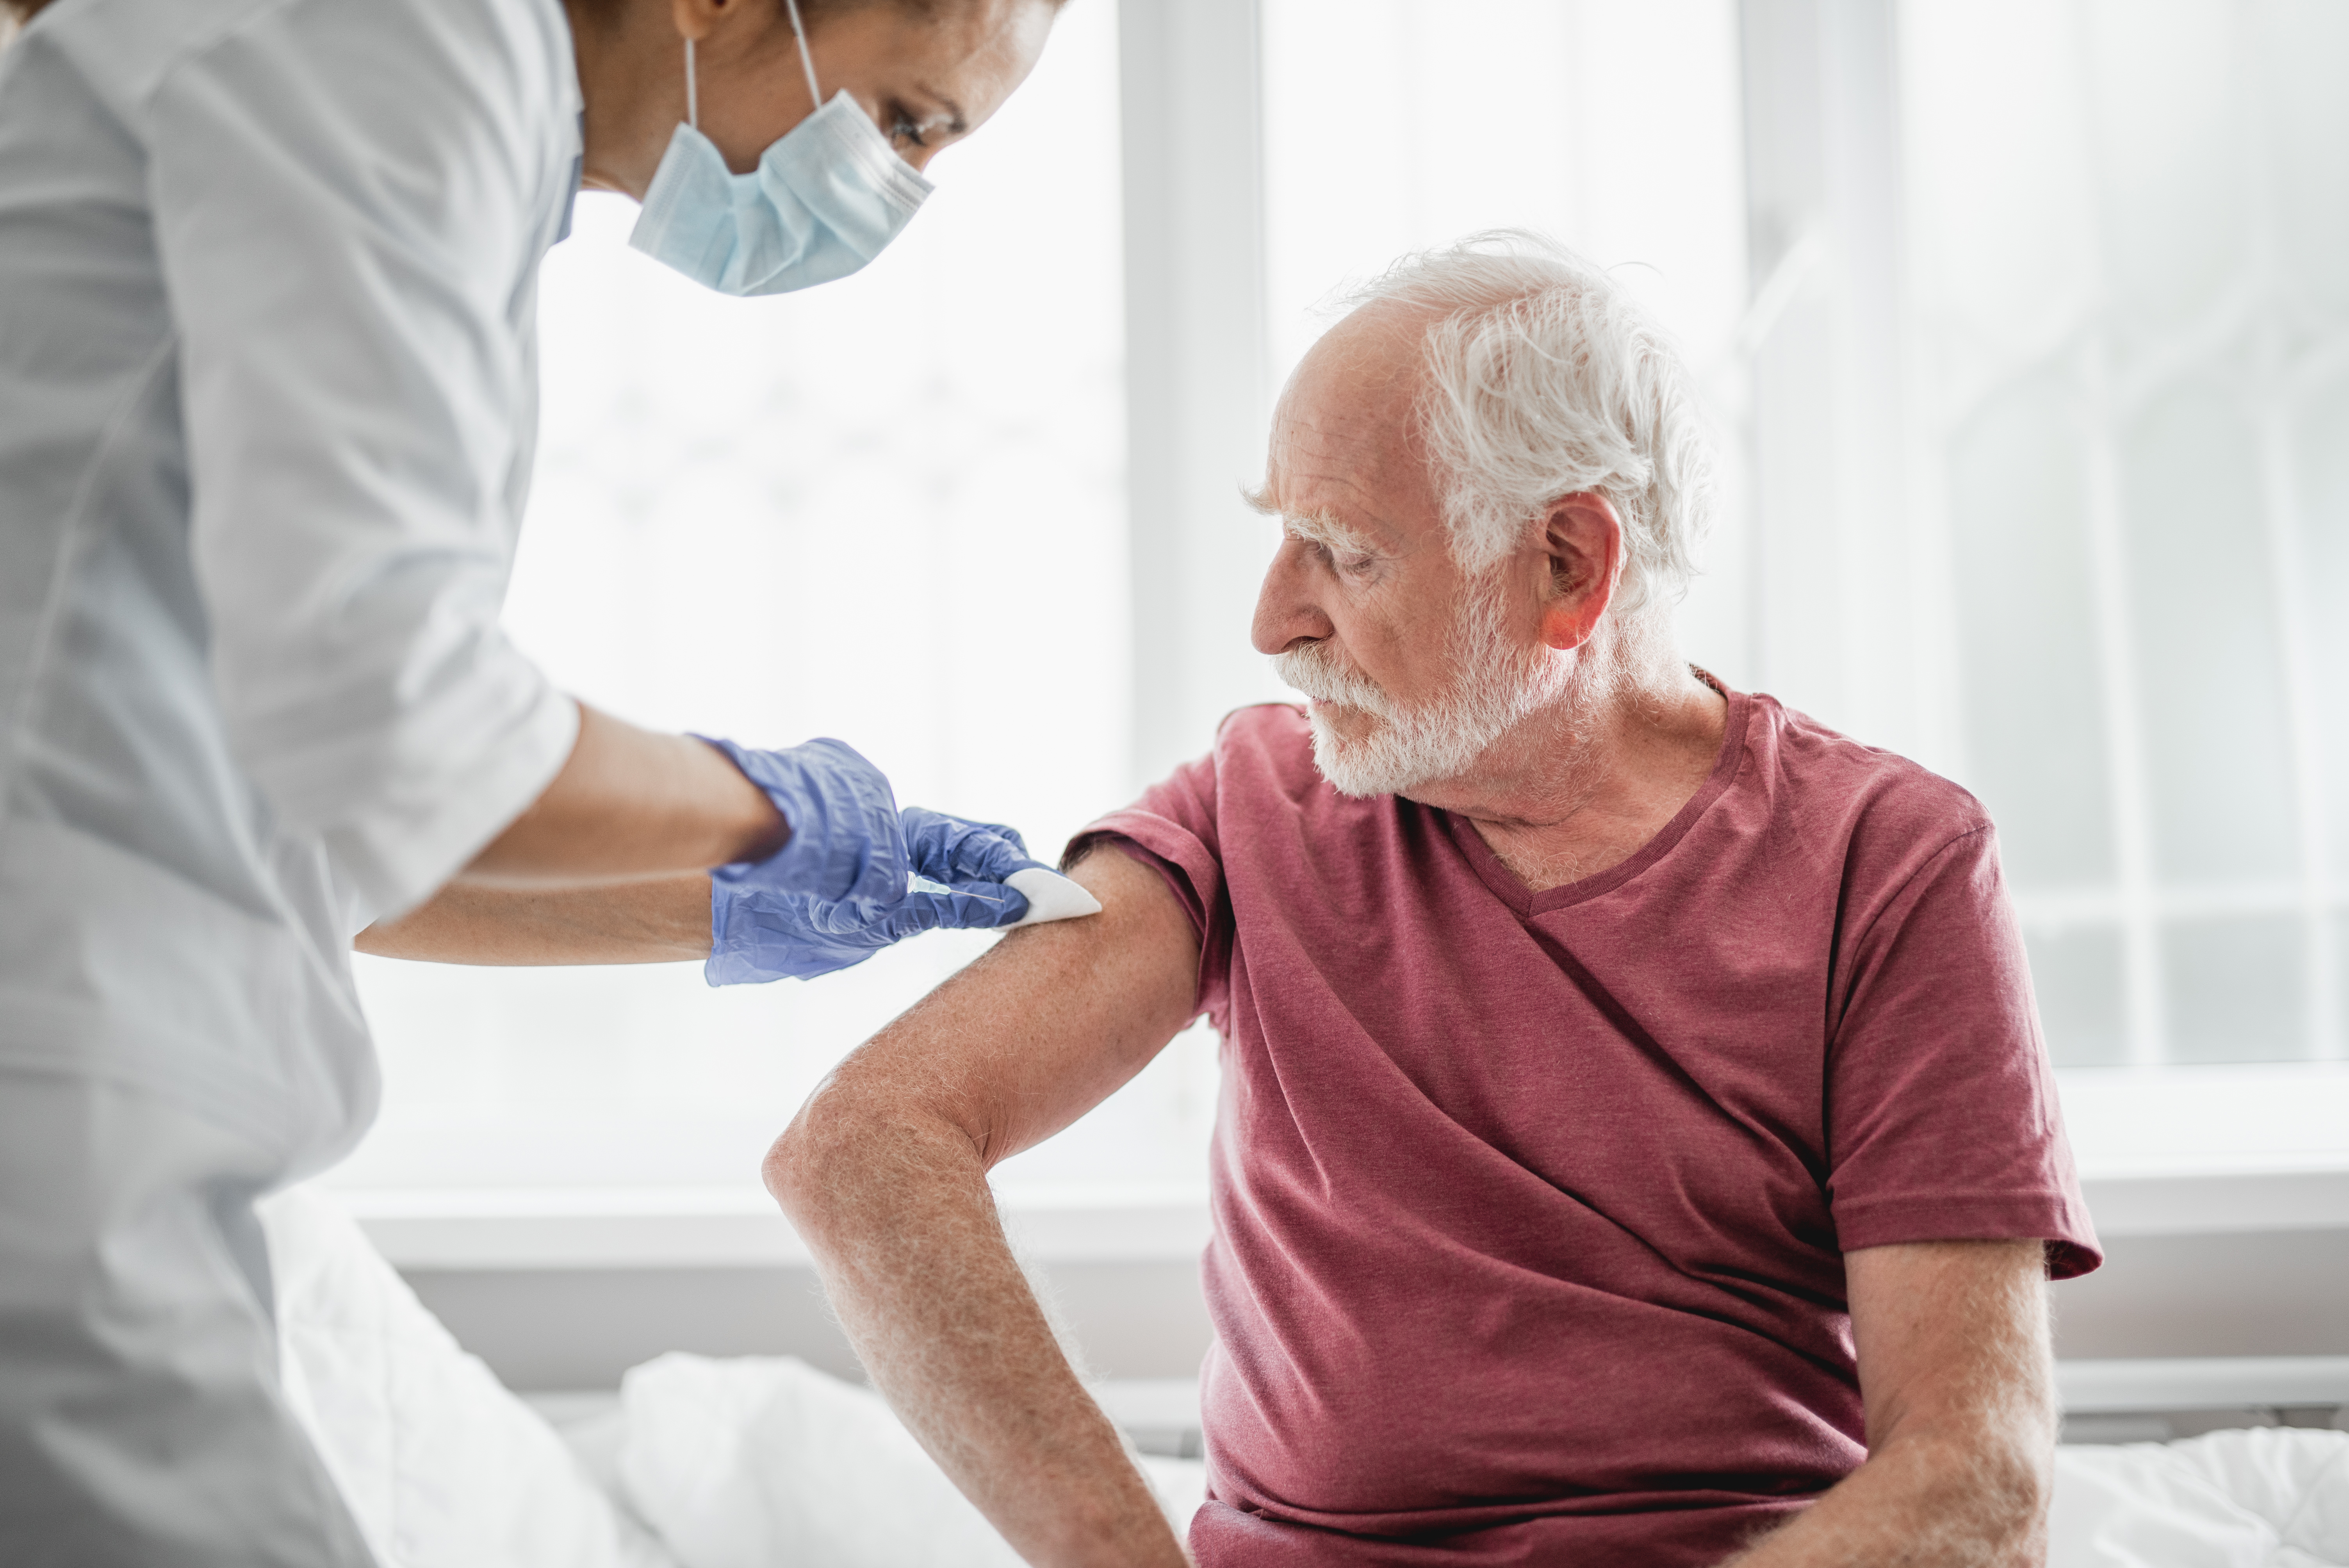 Image of older white man wearing a red shirt with his right sleeve up while a healthcare worker administers a vaccine.